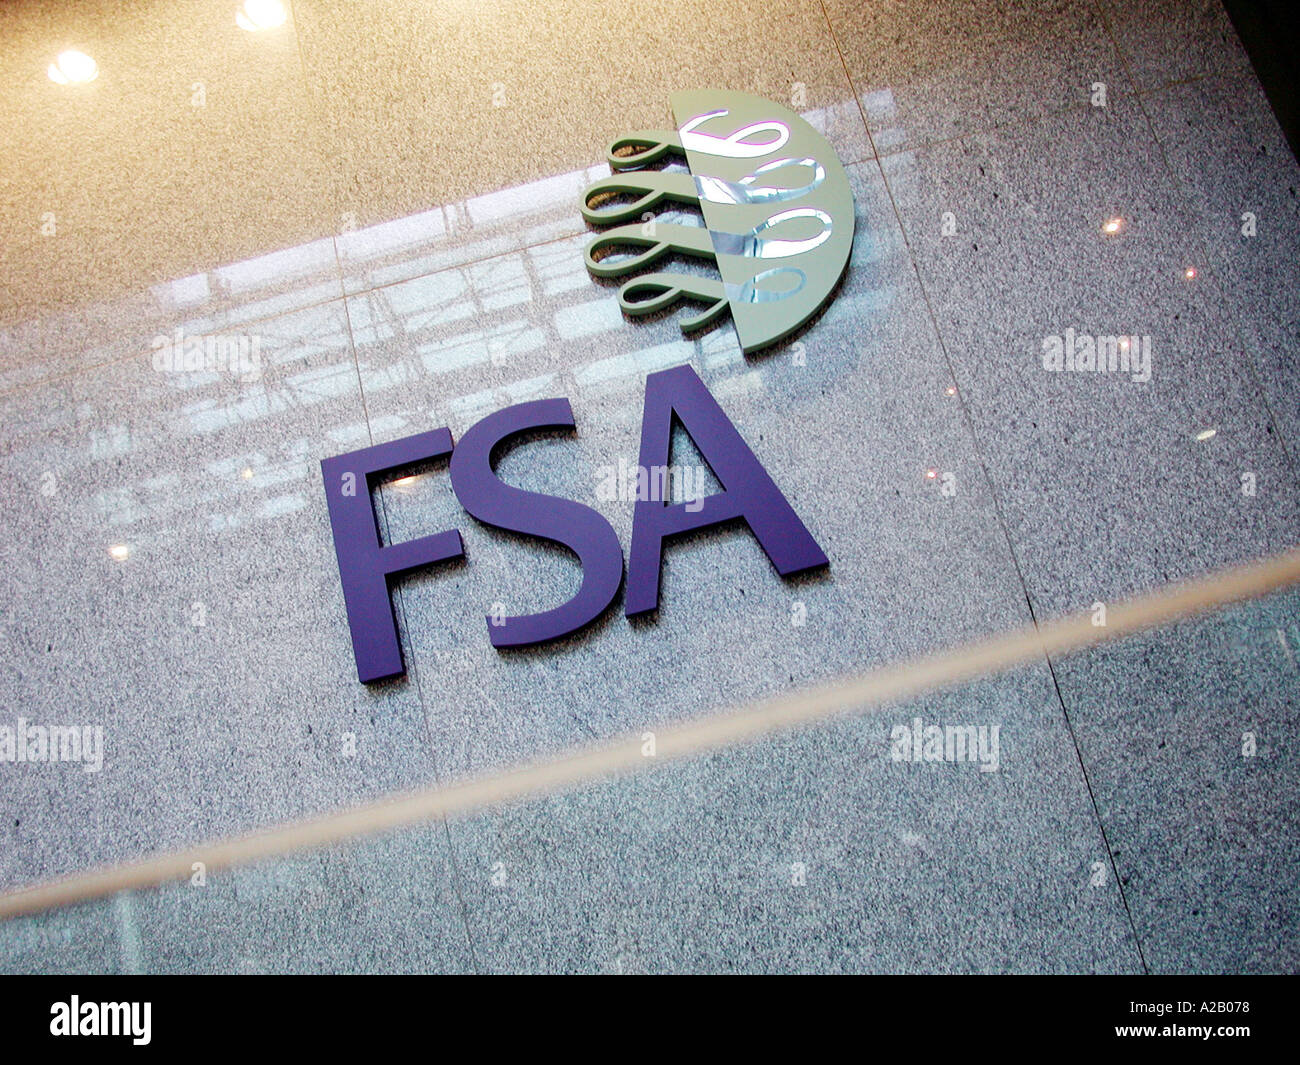 Inside the foyer of the FSA, Financial Services Authority Offices, Canary Wharf, Isle of Dogs, London E14, showing the FSA sign signage and logo. Stock Photo